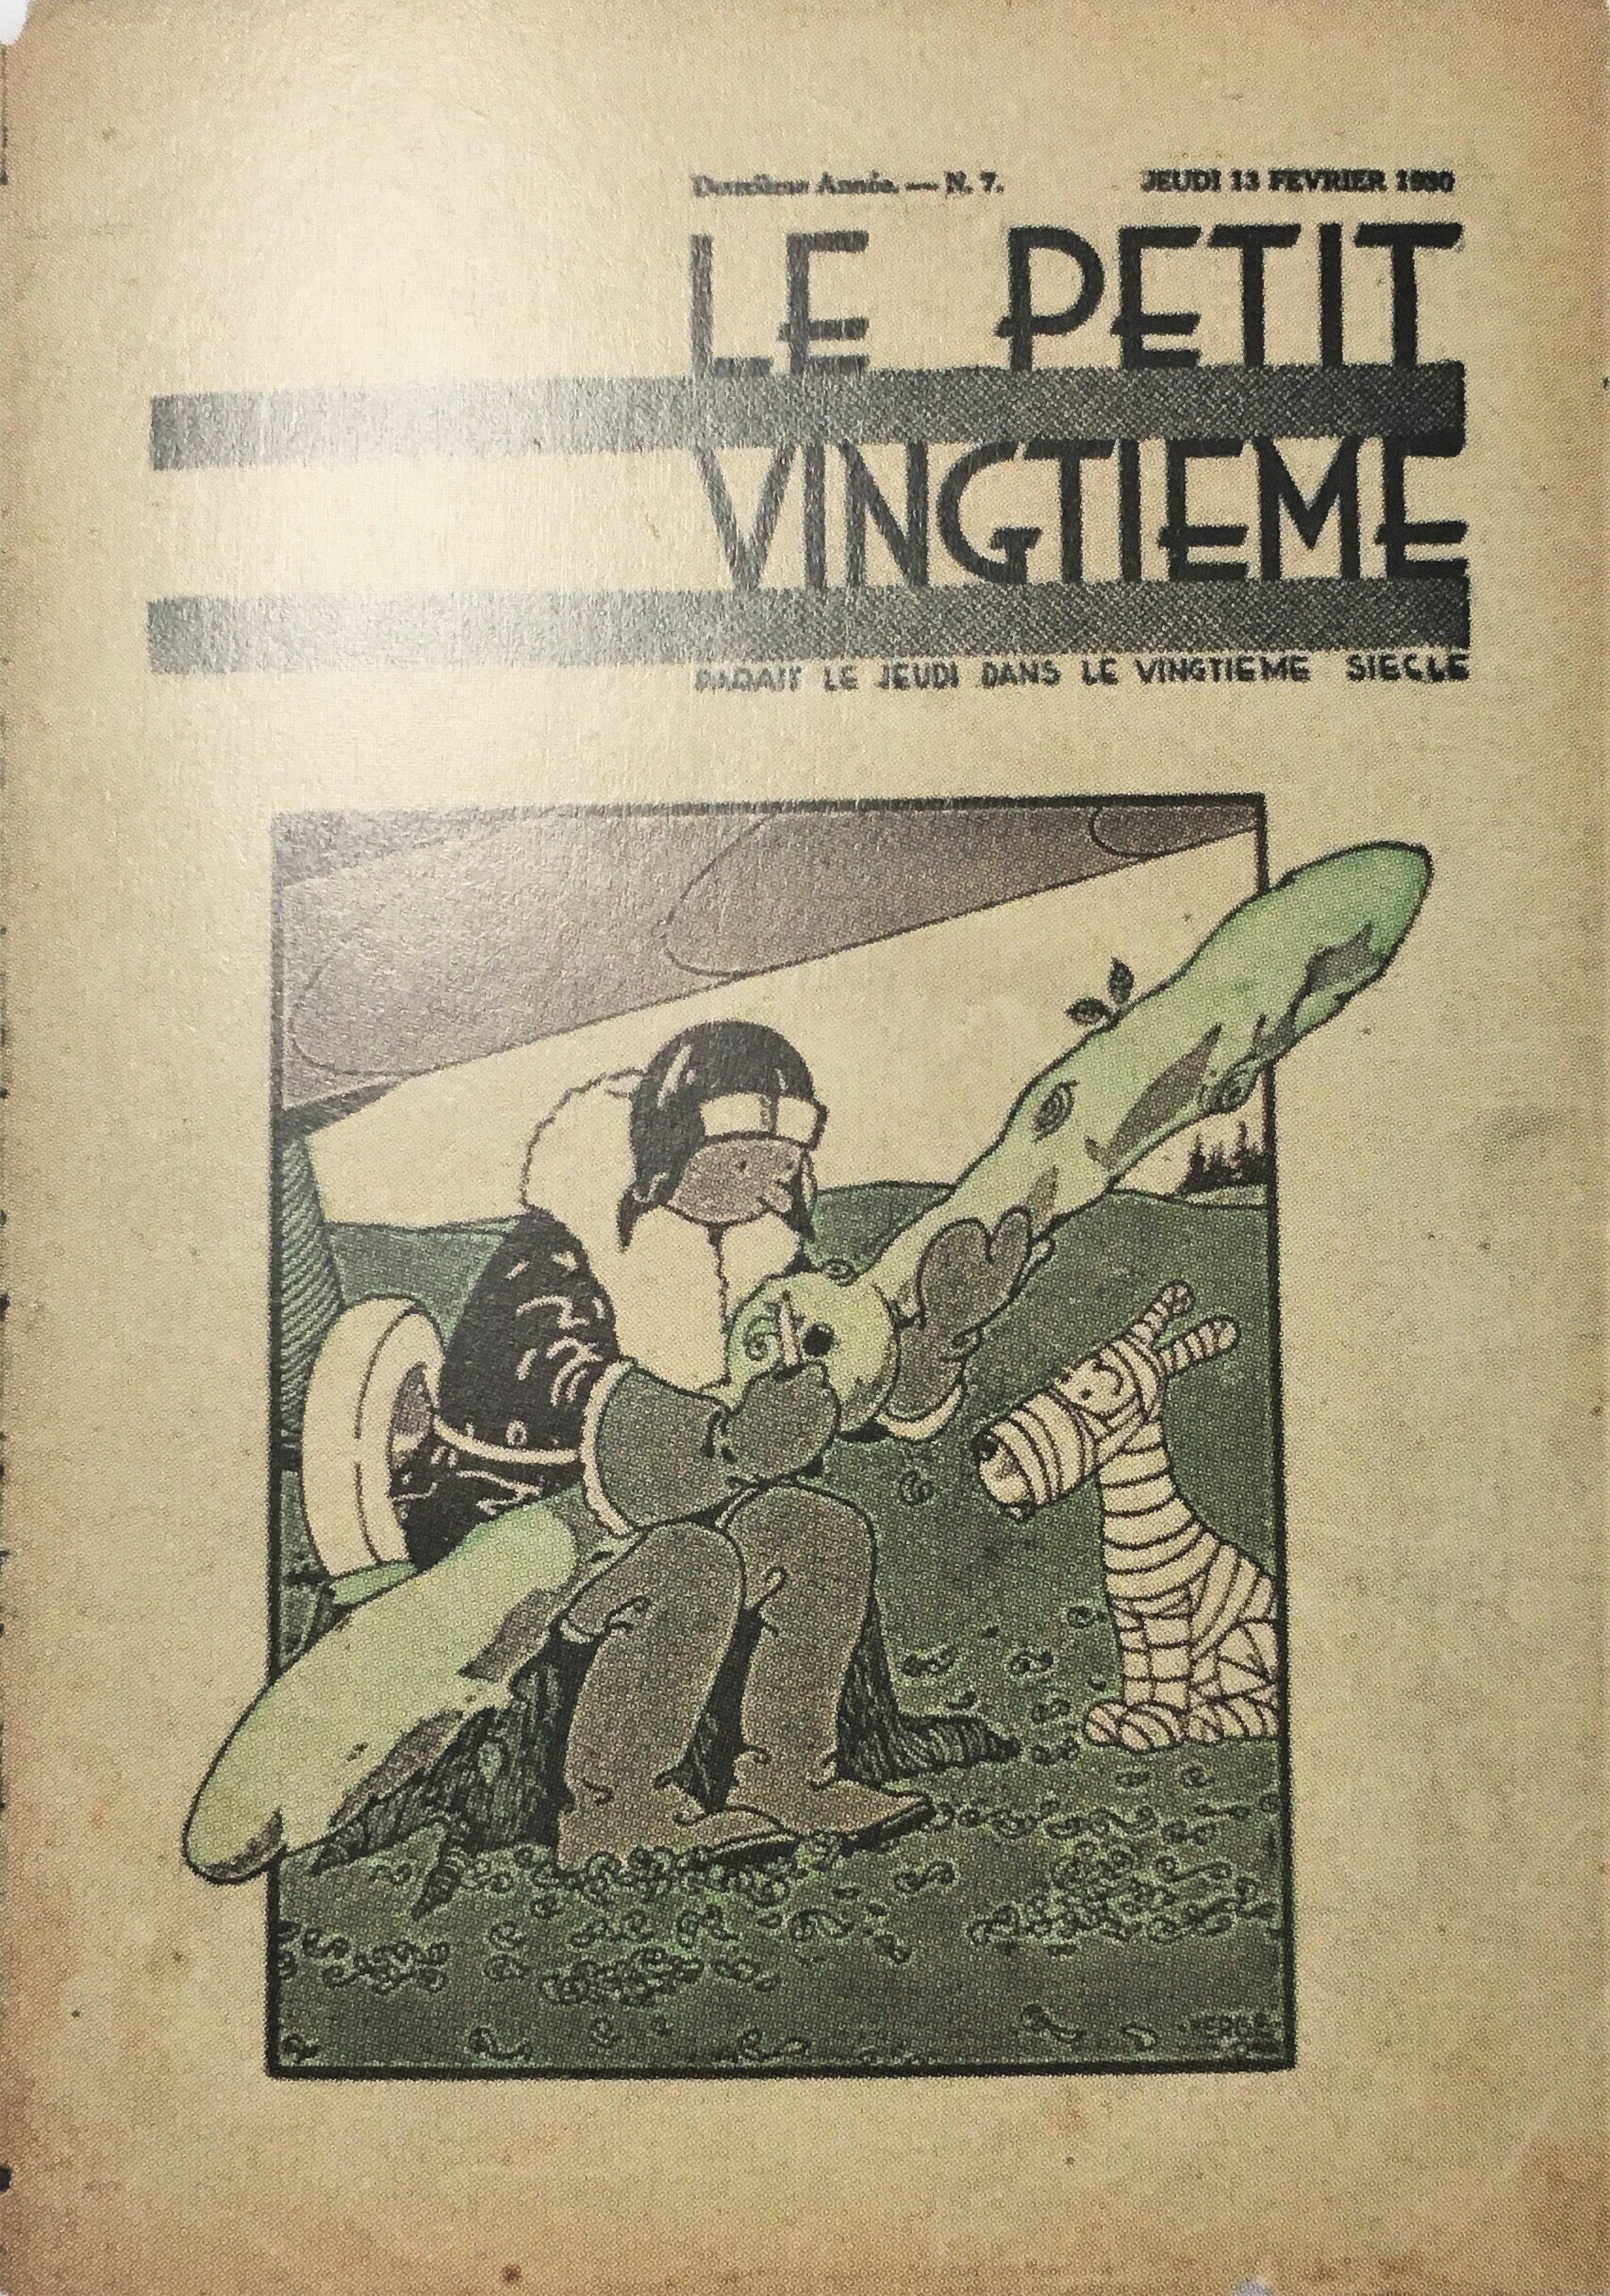  Cover of  Le Petit Vingtieme,  Febuary 13, 1930, depicting Tintin carving a propeller from a plane. It’s unknown if Herge ever completed this task in his own time as a boy scout. 